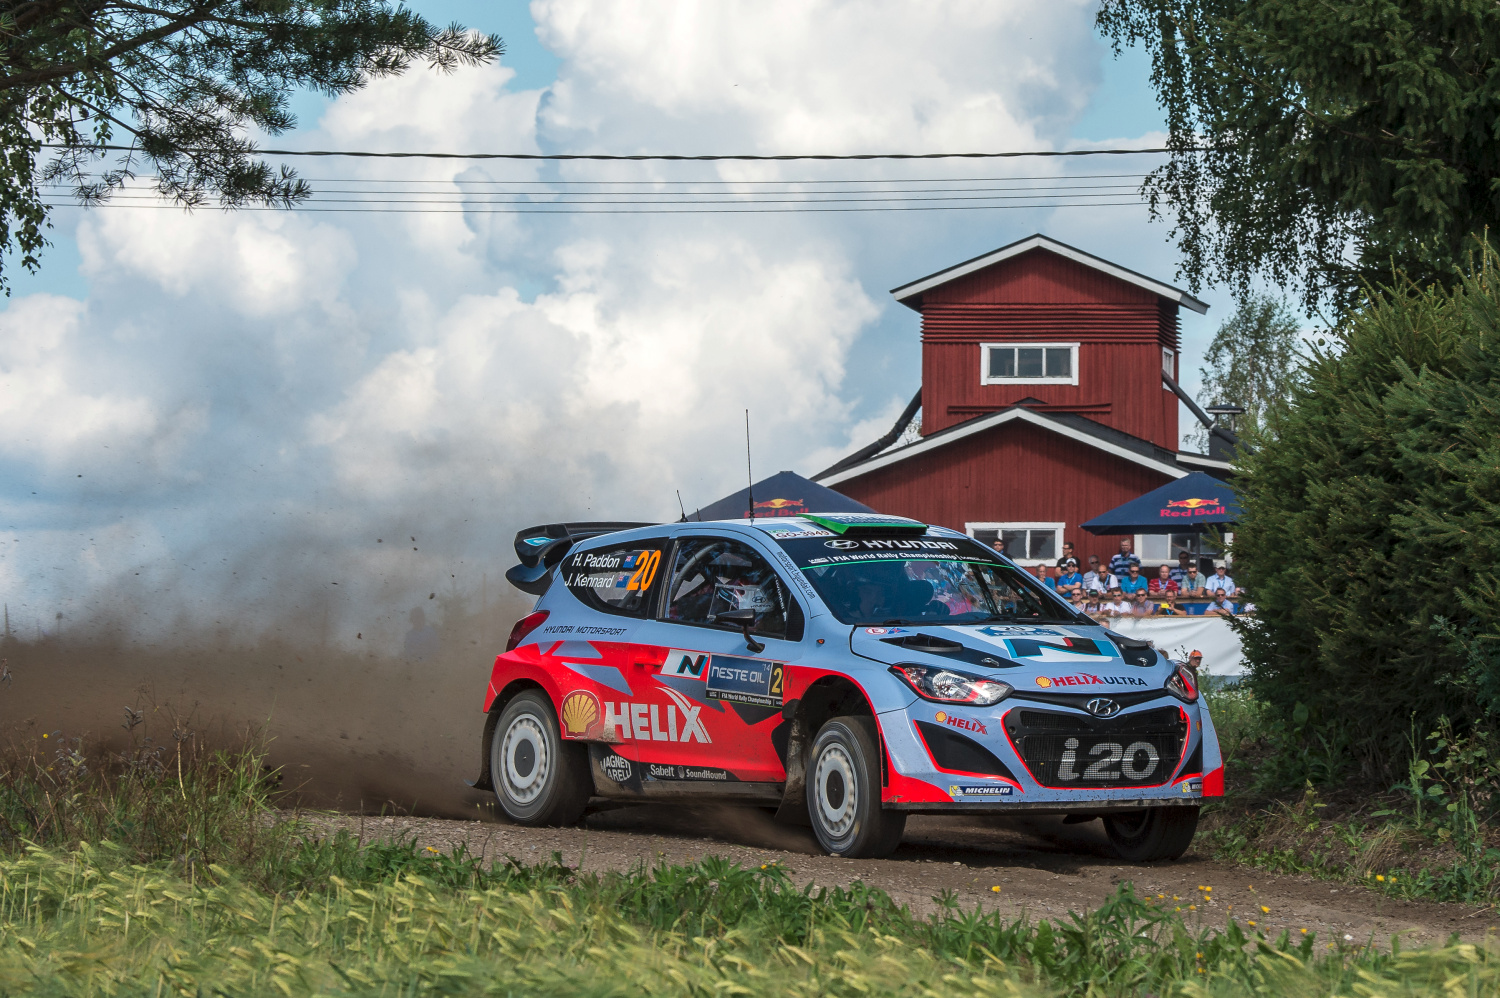 Forward momentum for Paddon/Kennard on Day Two